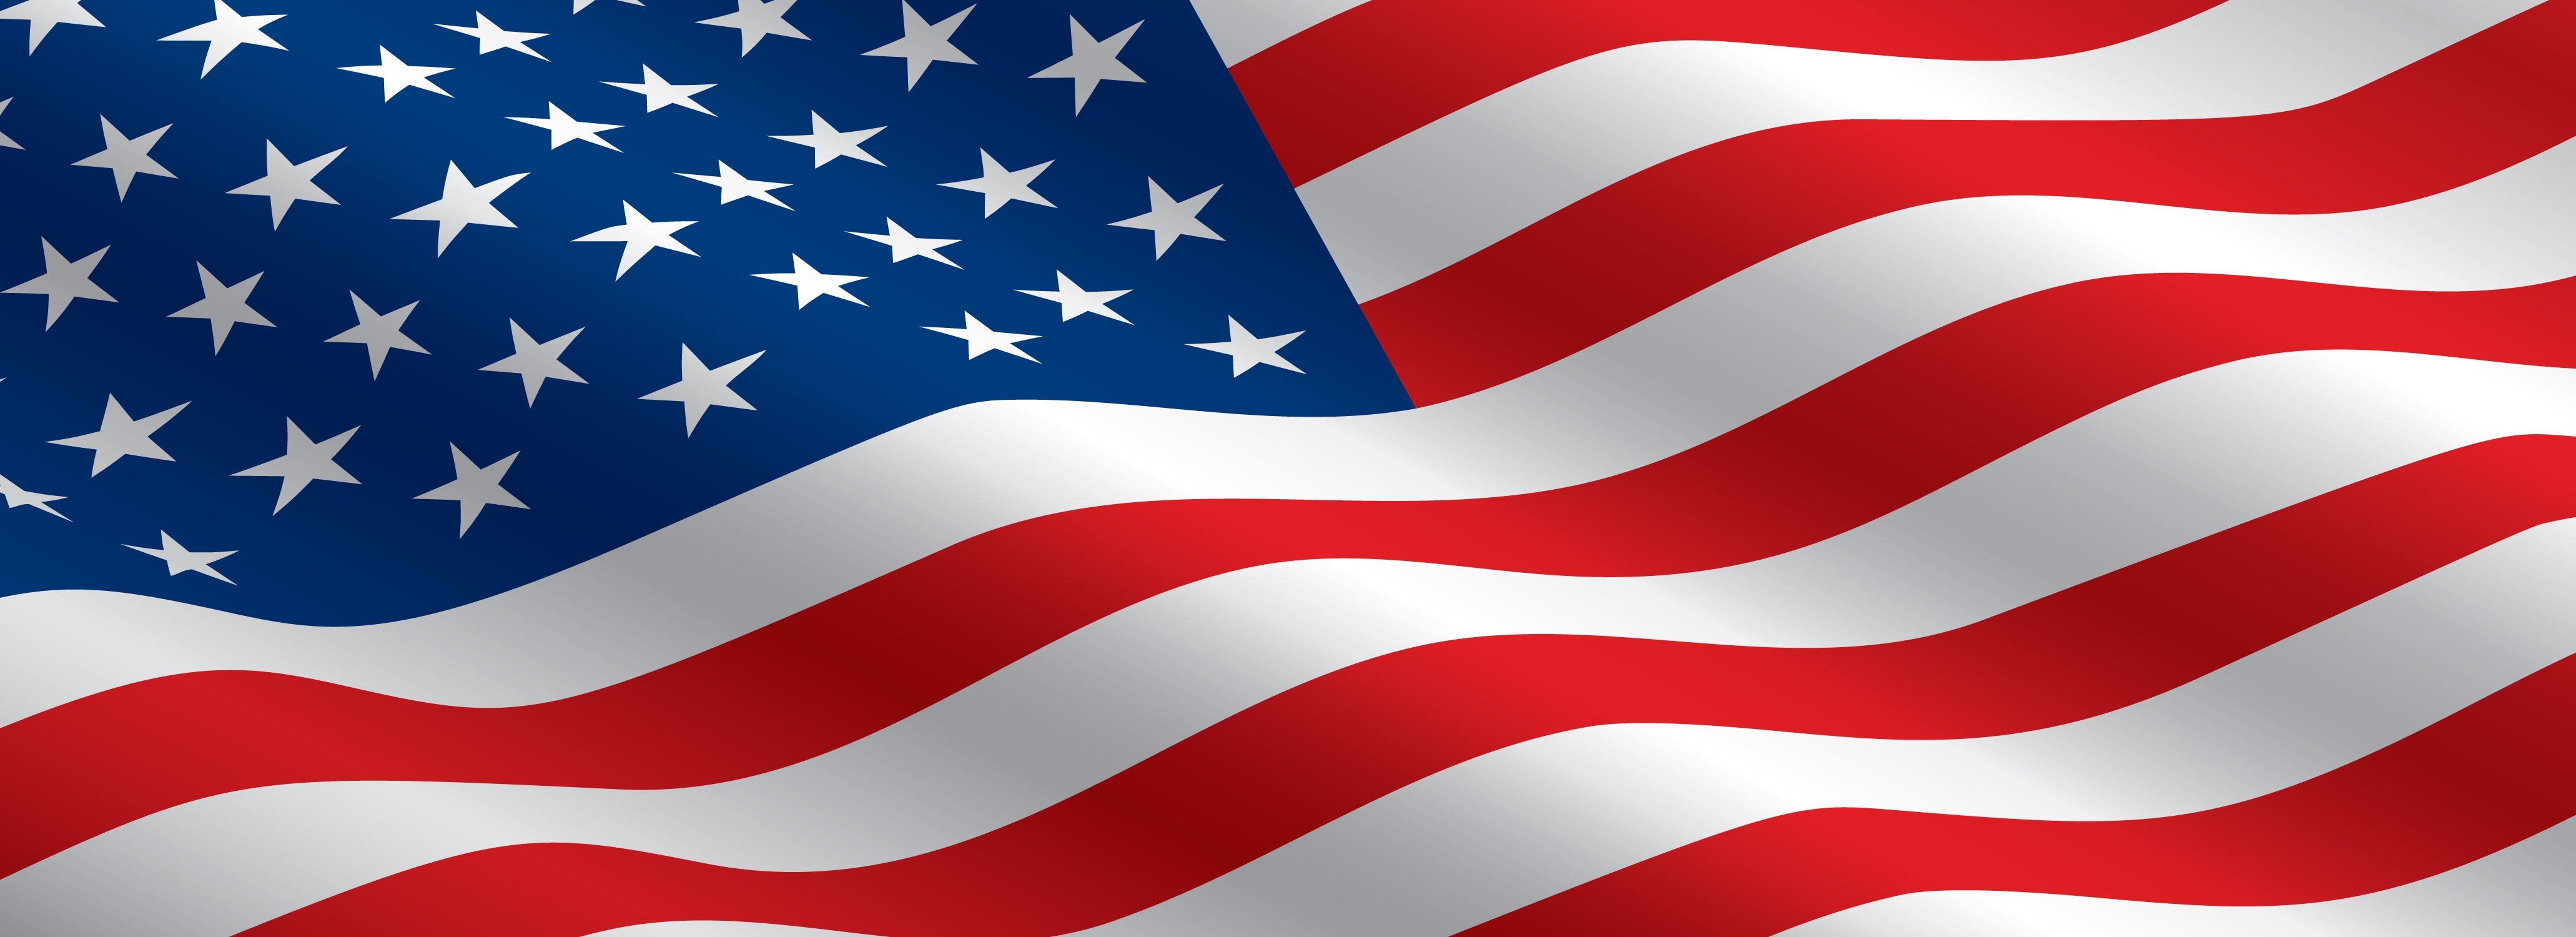 Us Flag Banner Clipart - Clipartfest in American Flag Banners 